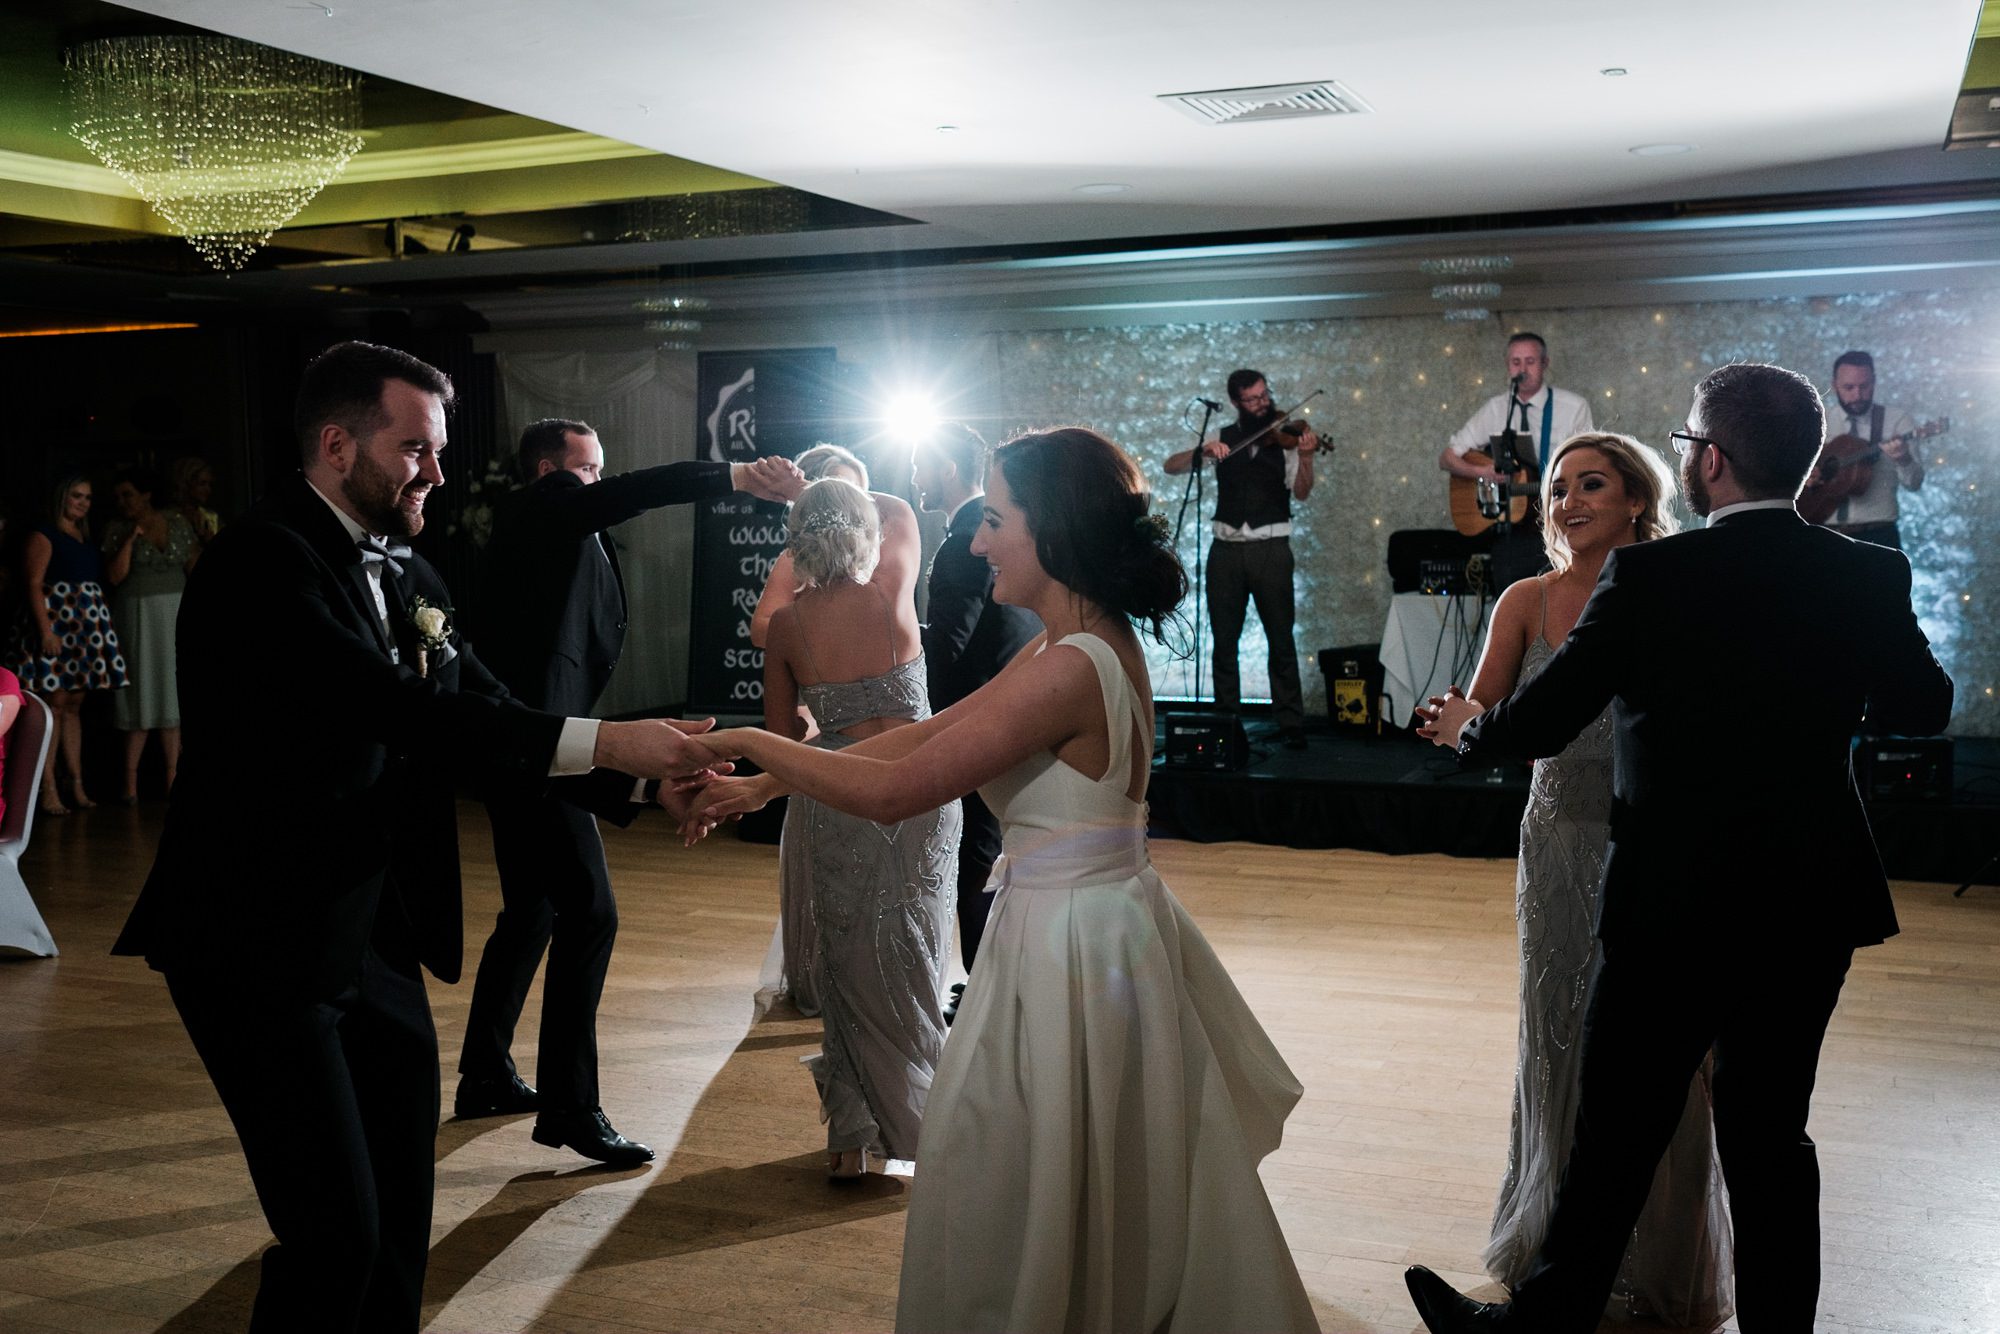 dancing with bridal party